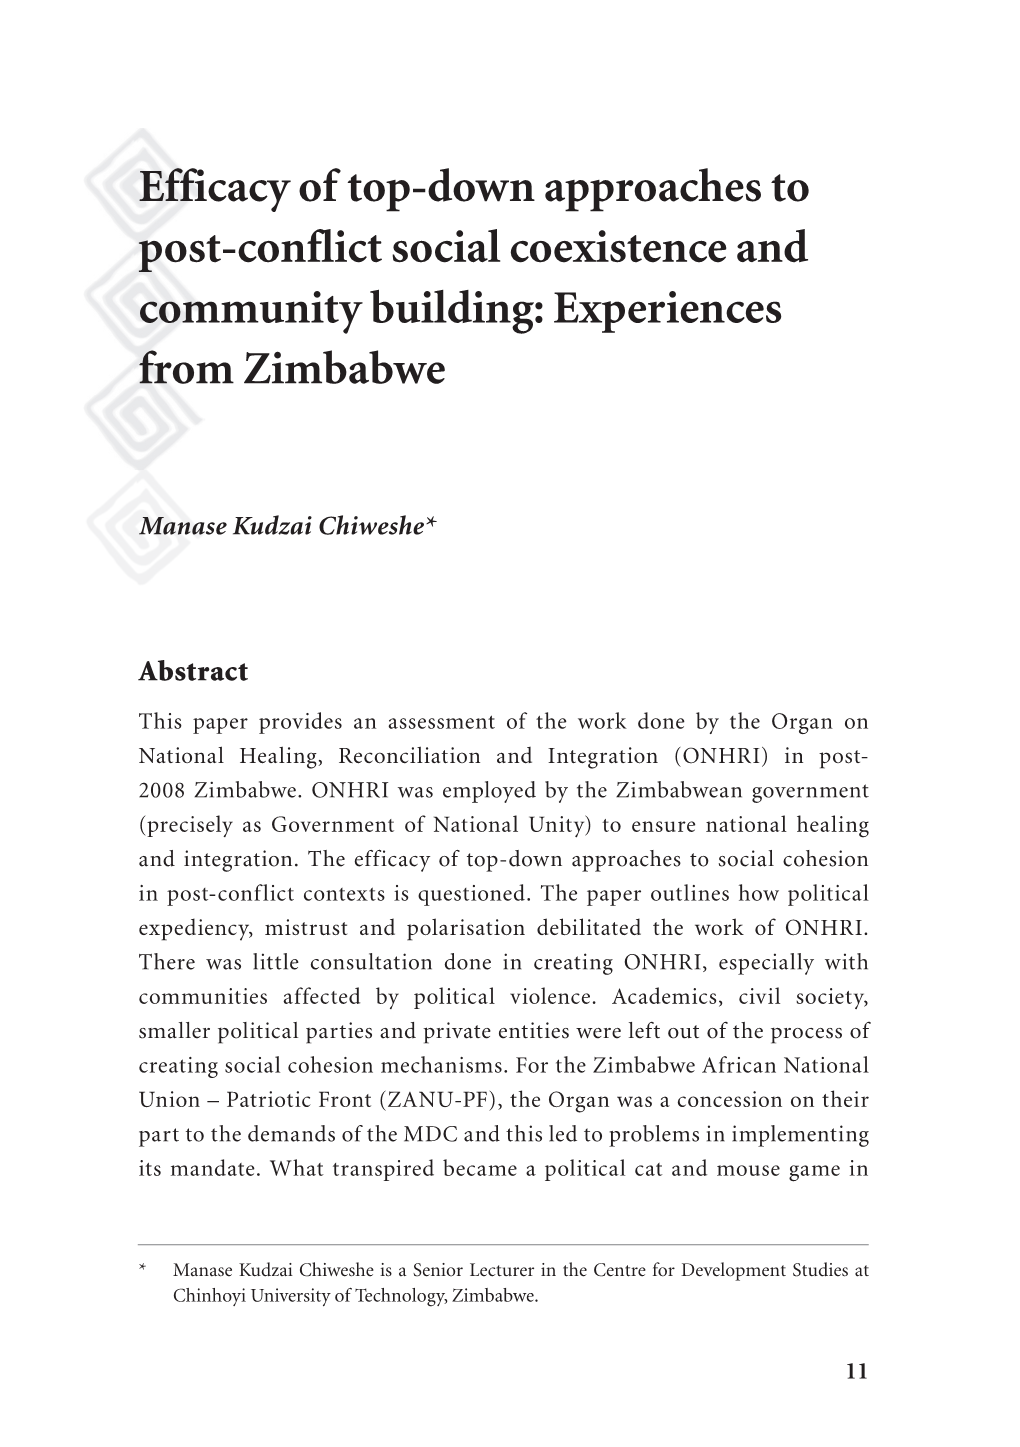 Efficacy of Top-Down Approaches to Post-Conflict Social Coexistence and Community Building: Experiences from Zimbabwe